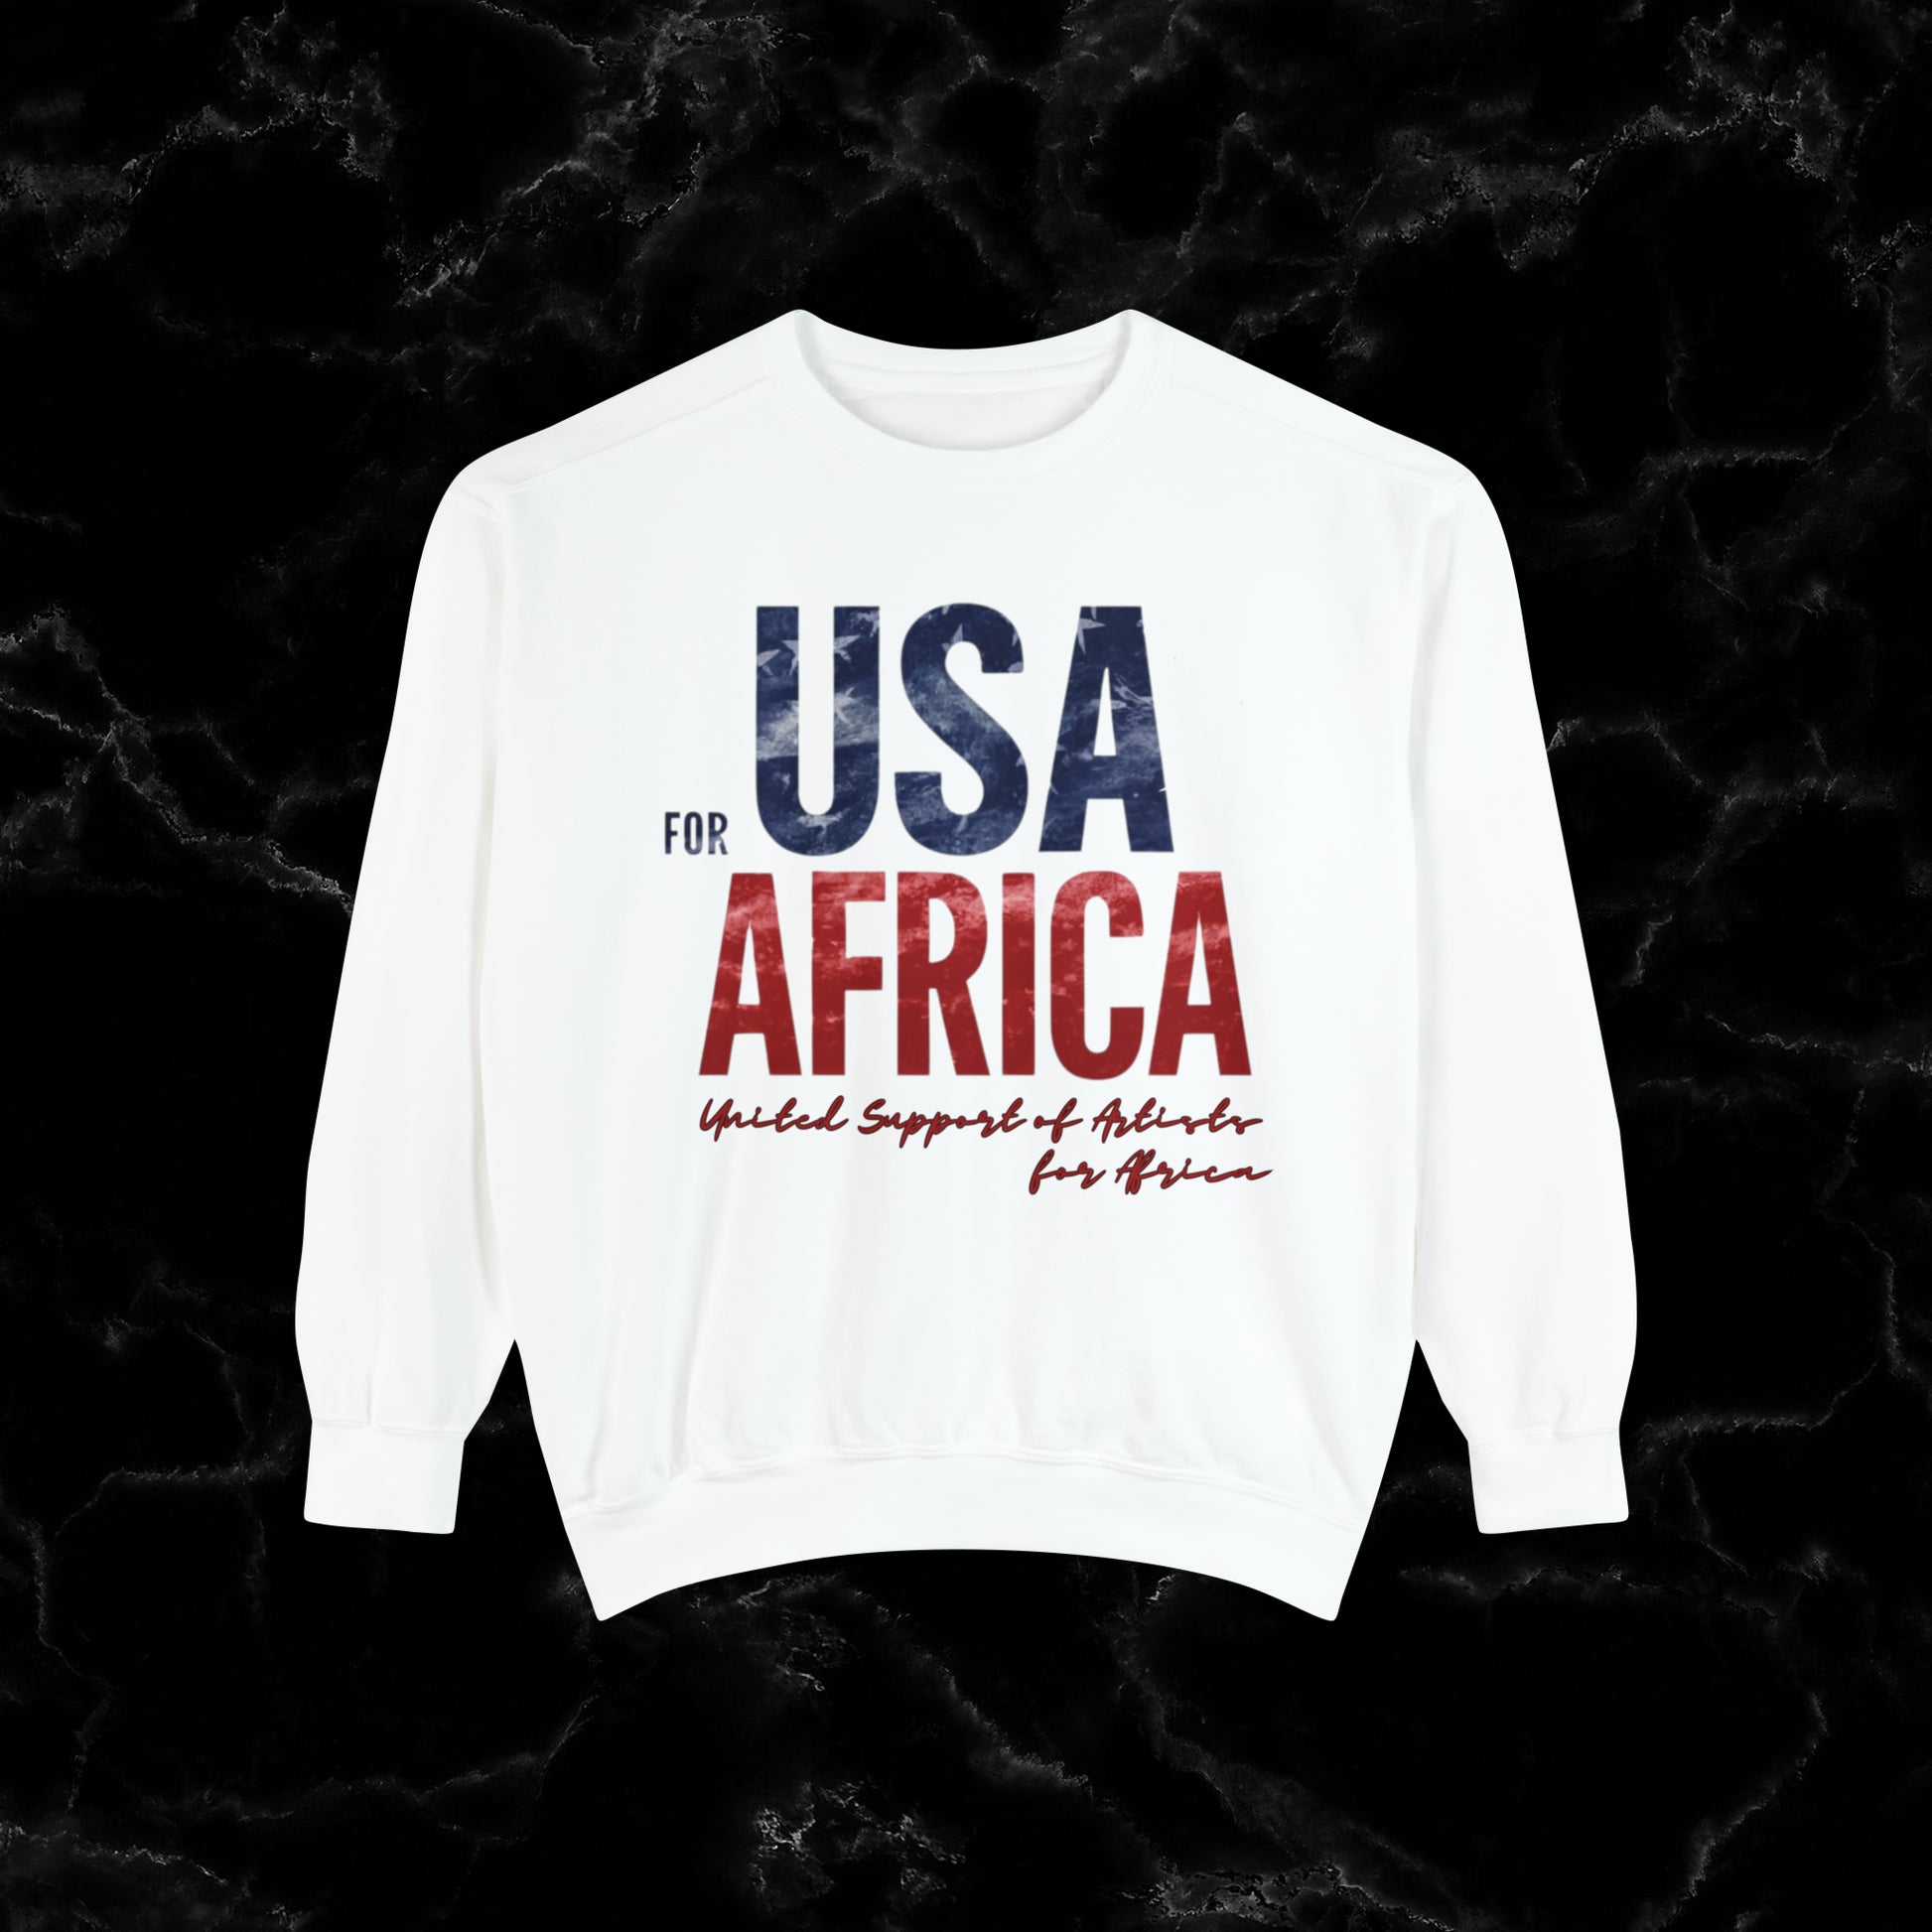 USA For Africa Jumper: Iconic 80s Fashion Remake Worn by Kenny Rogers, Diana Ross, and More – Embrace the Nostalgia of 'We Are the World' Era with This Michael Jackson Inspired Tribute! Sweatshirt   